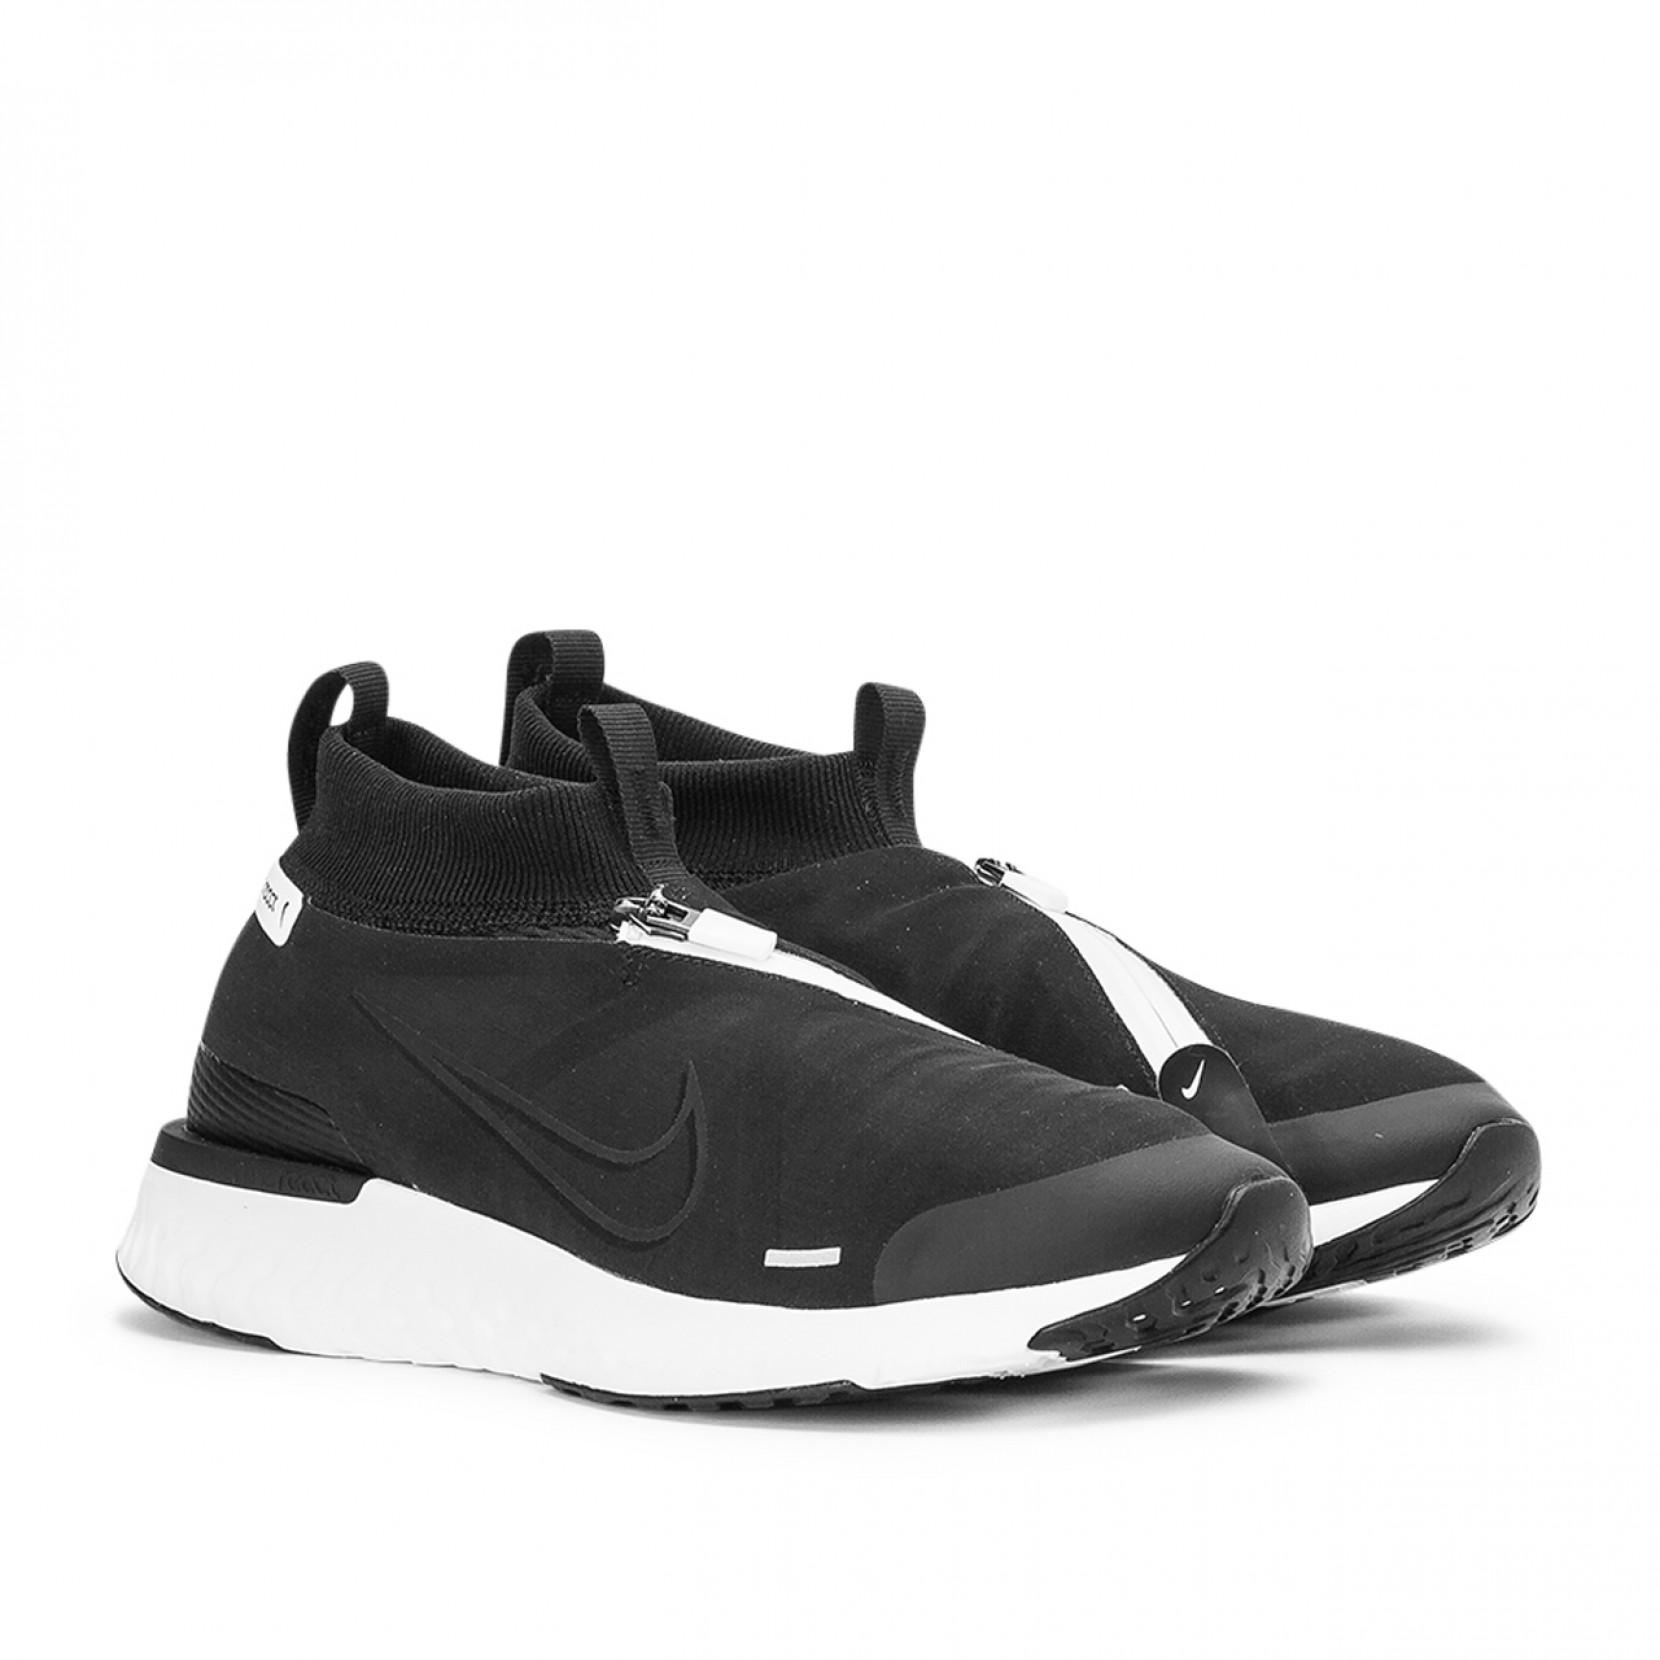 Nike Synthetic React City in Black for Men - Lyst